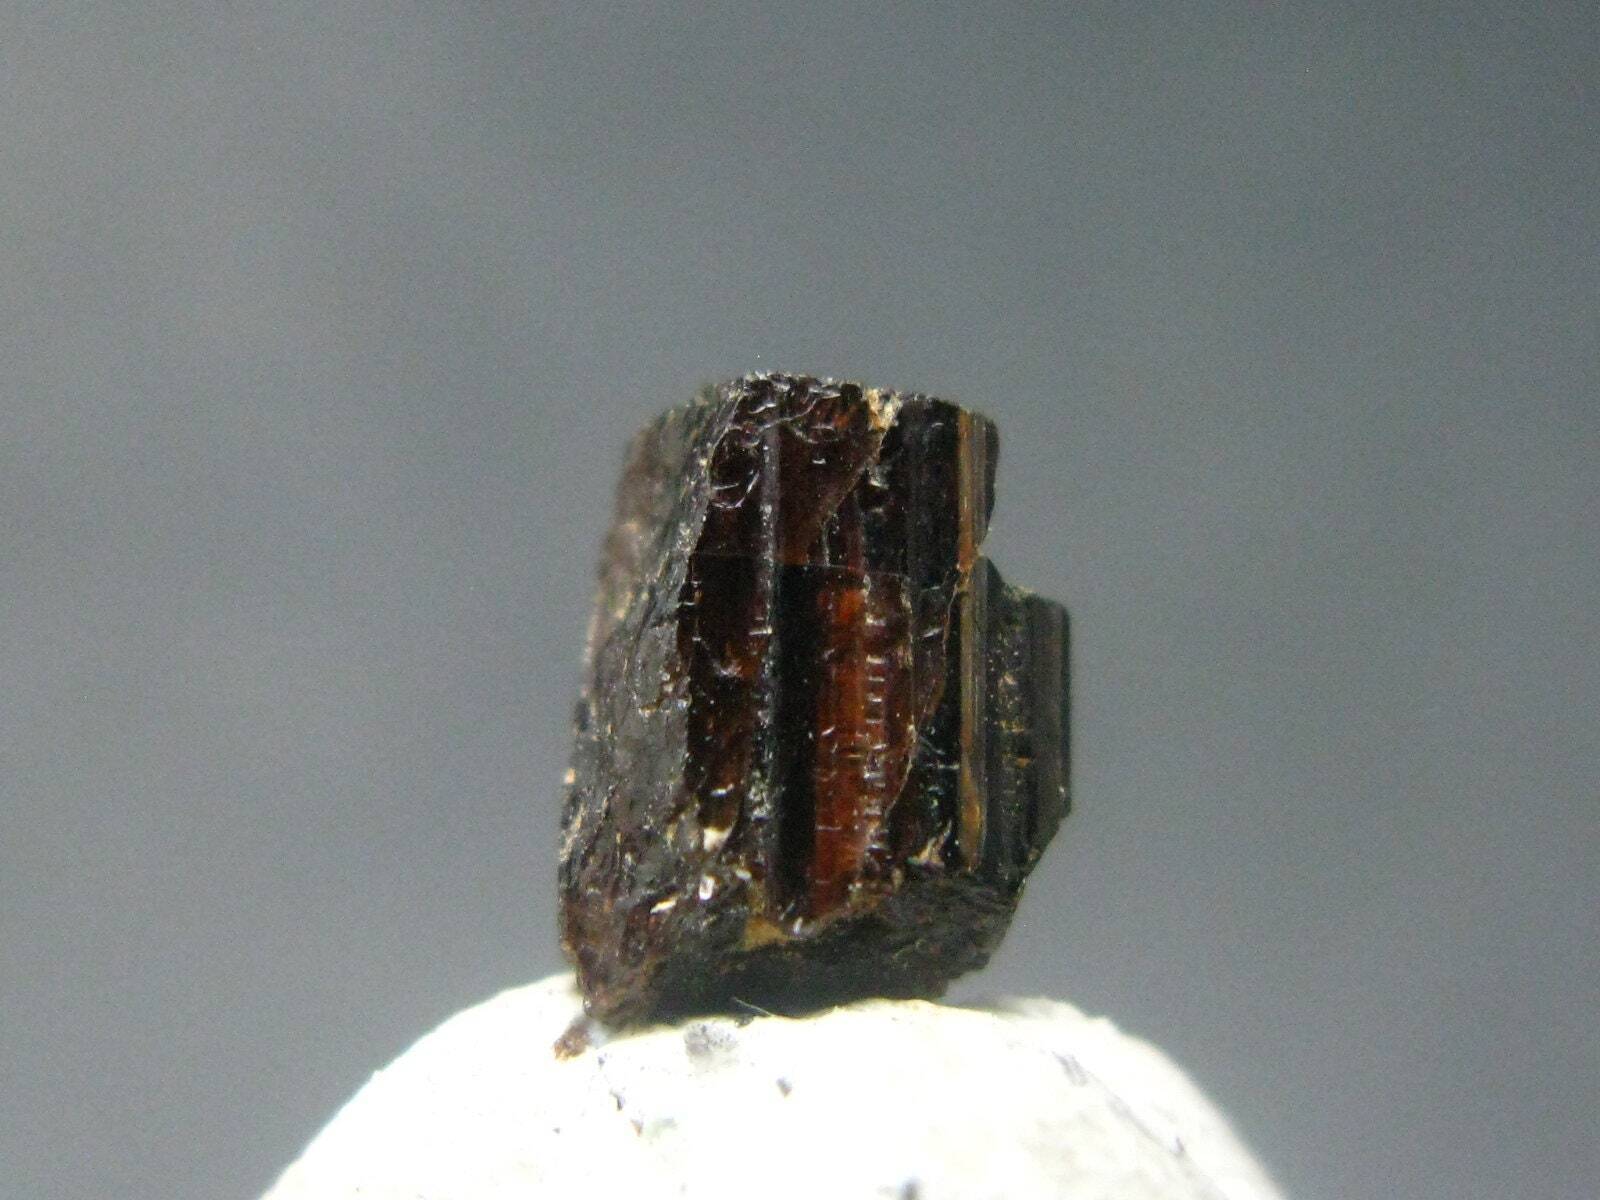 Rare Painite Crystal From Myanmar - 1.55 Carats